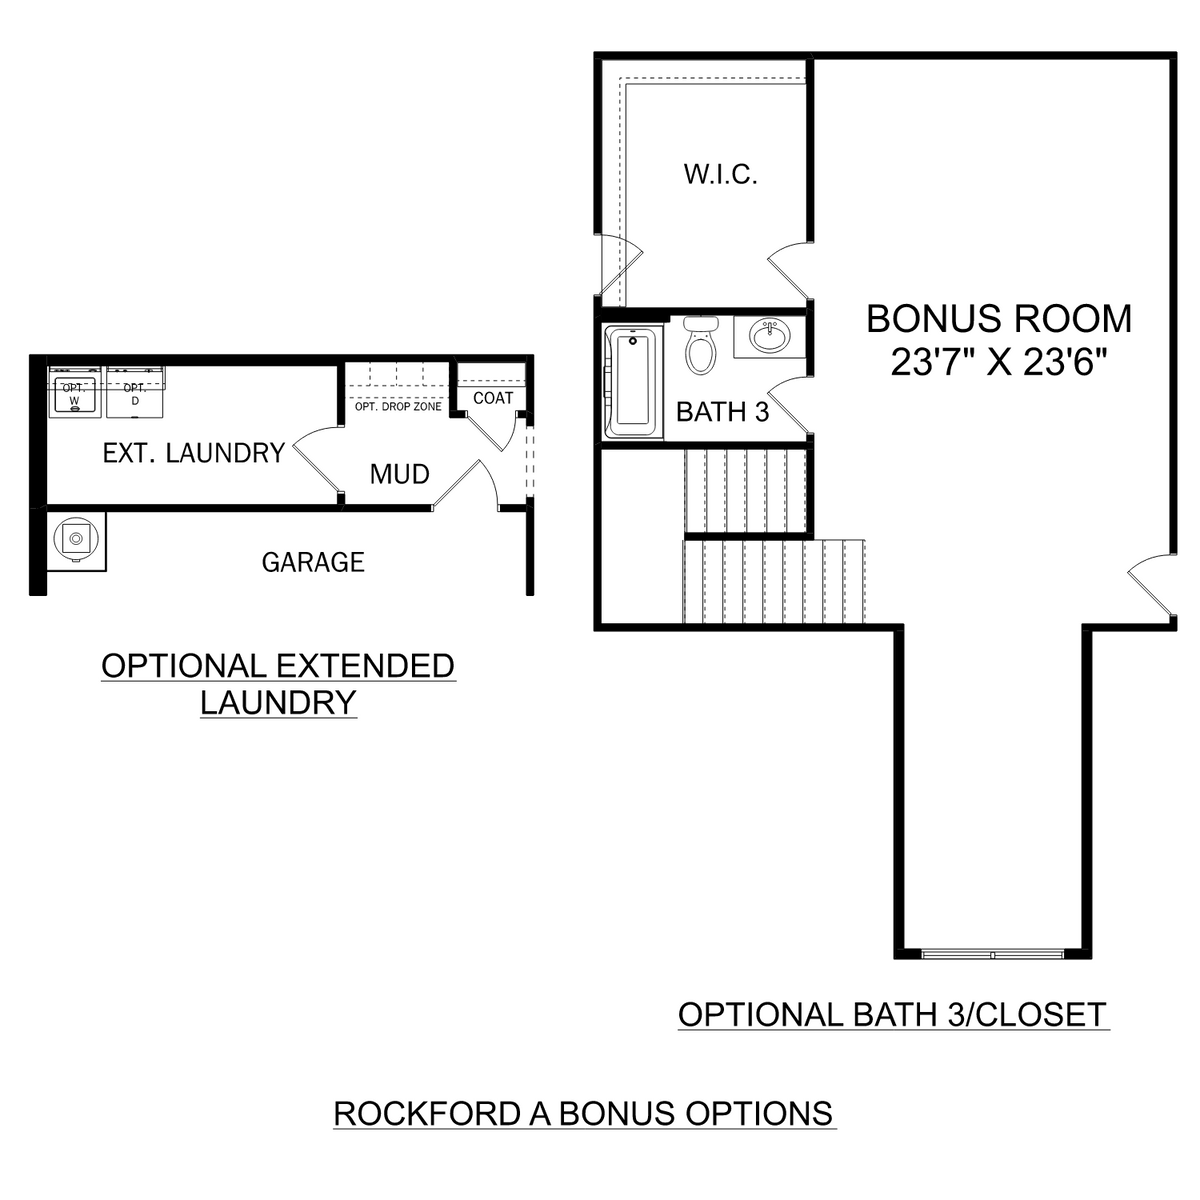 3 - The Rockford with Bonus buildable floor plan layout in Davidson Homes' River Road Estates community.